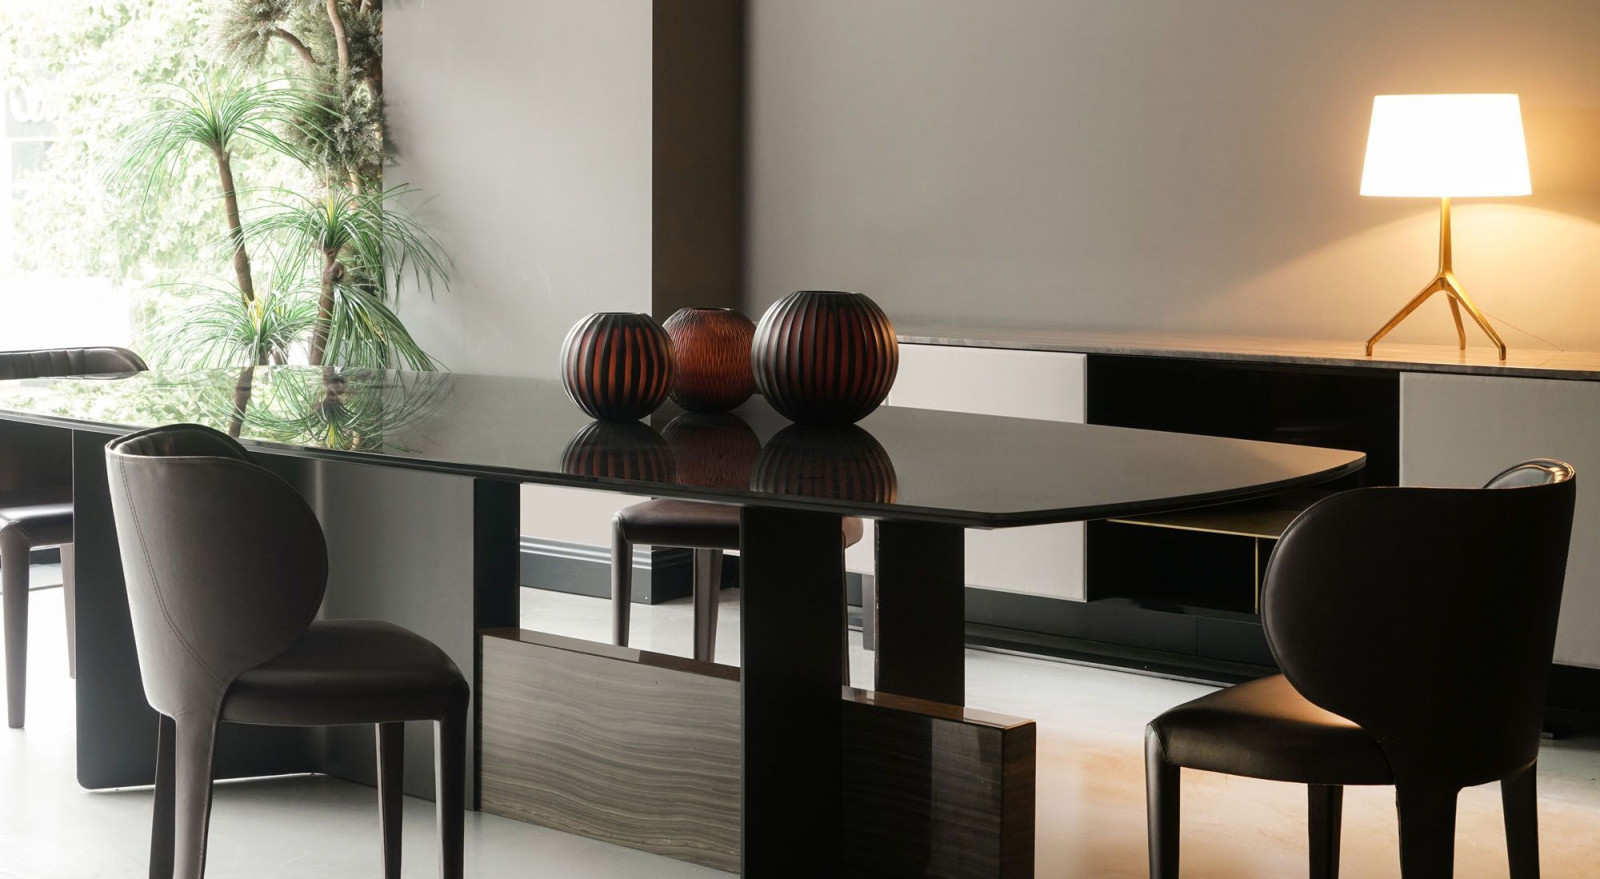 2. view of the Ritz Table placed in a modern living room